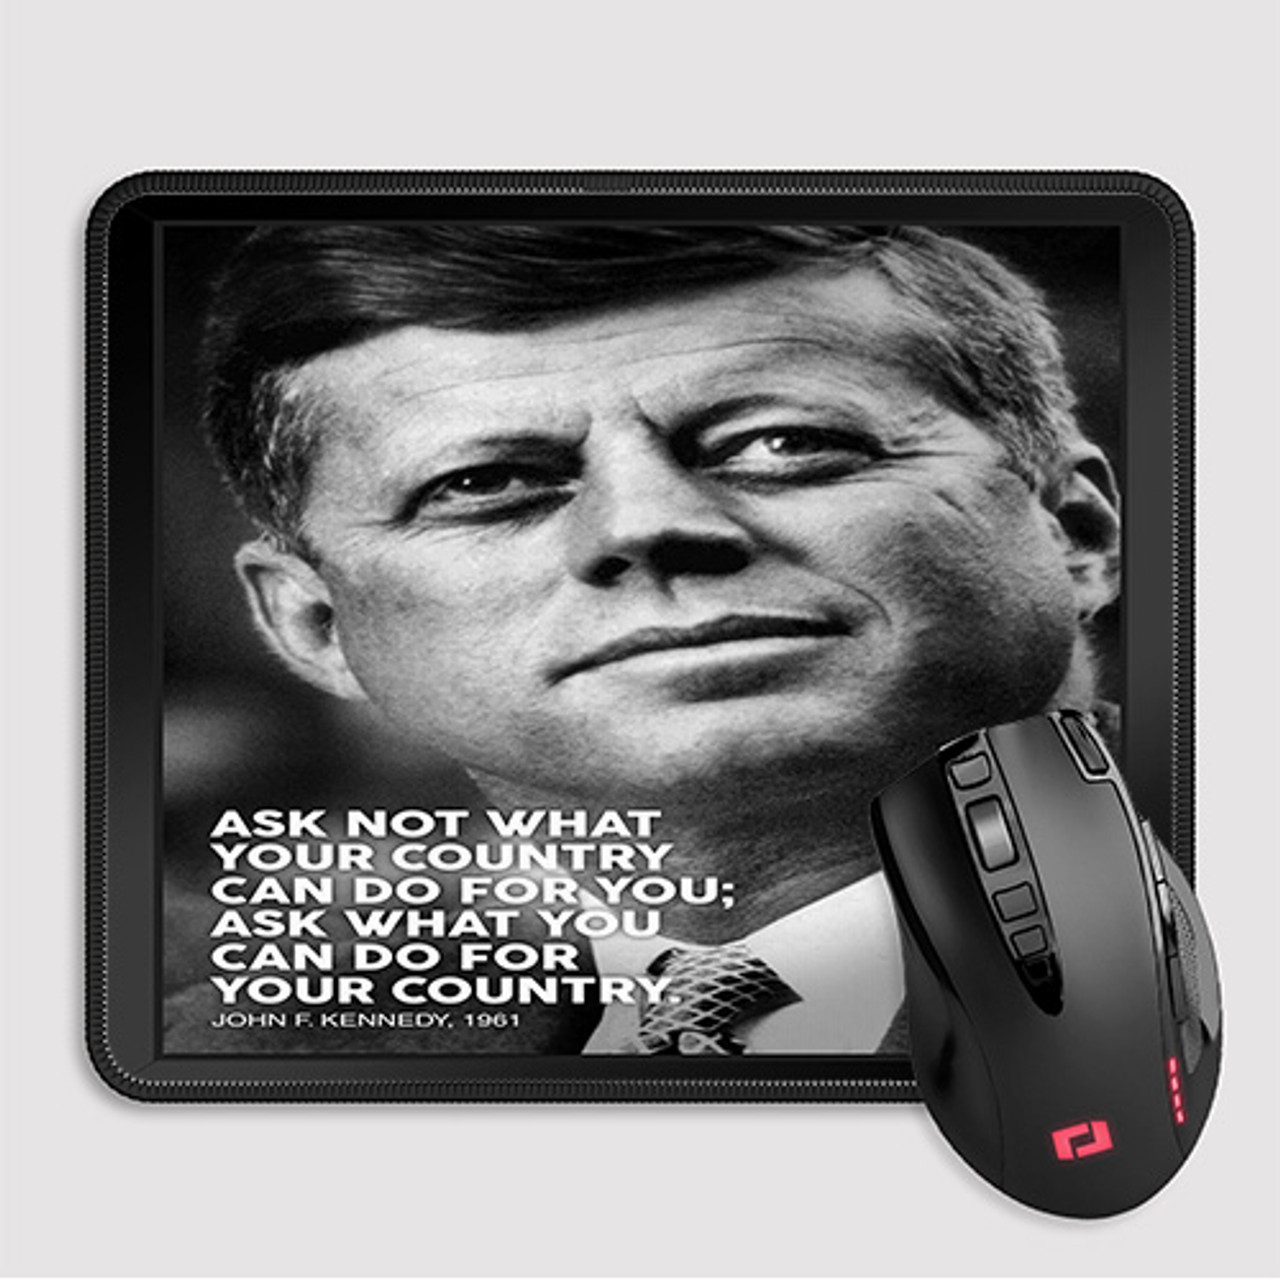 You got this mousepad with quotes